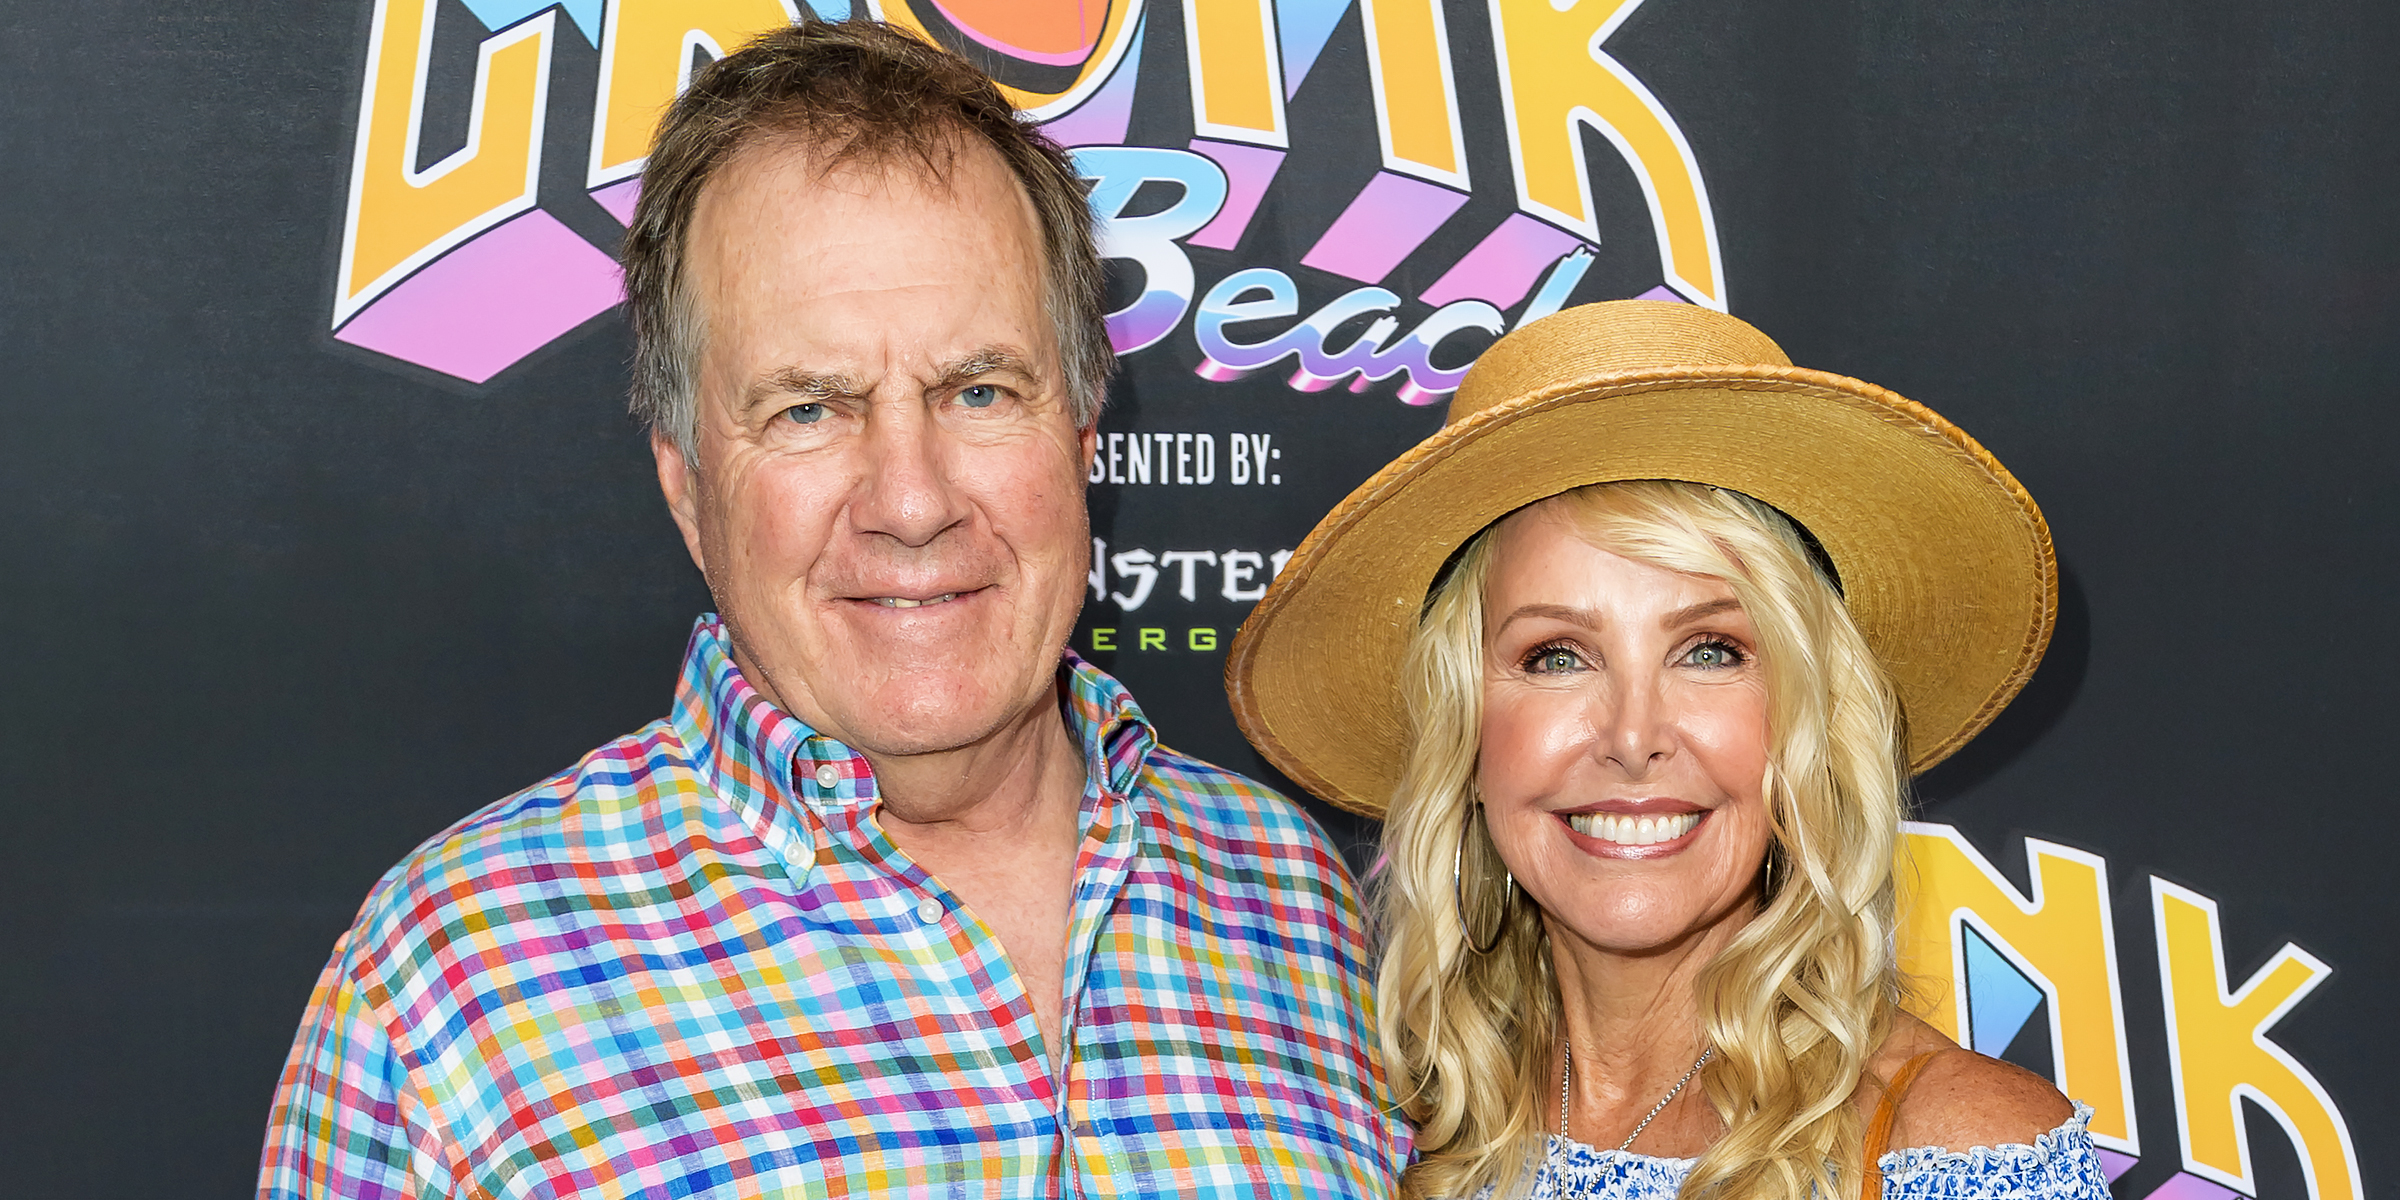 Bill Belichick and Linda Holliday. | Source: Getty Images